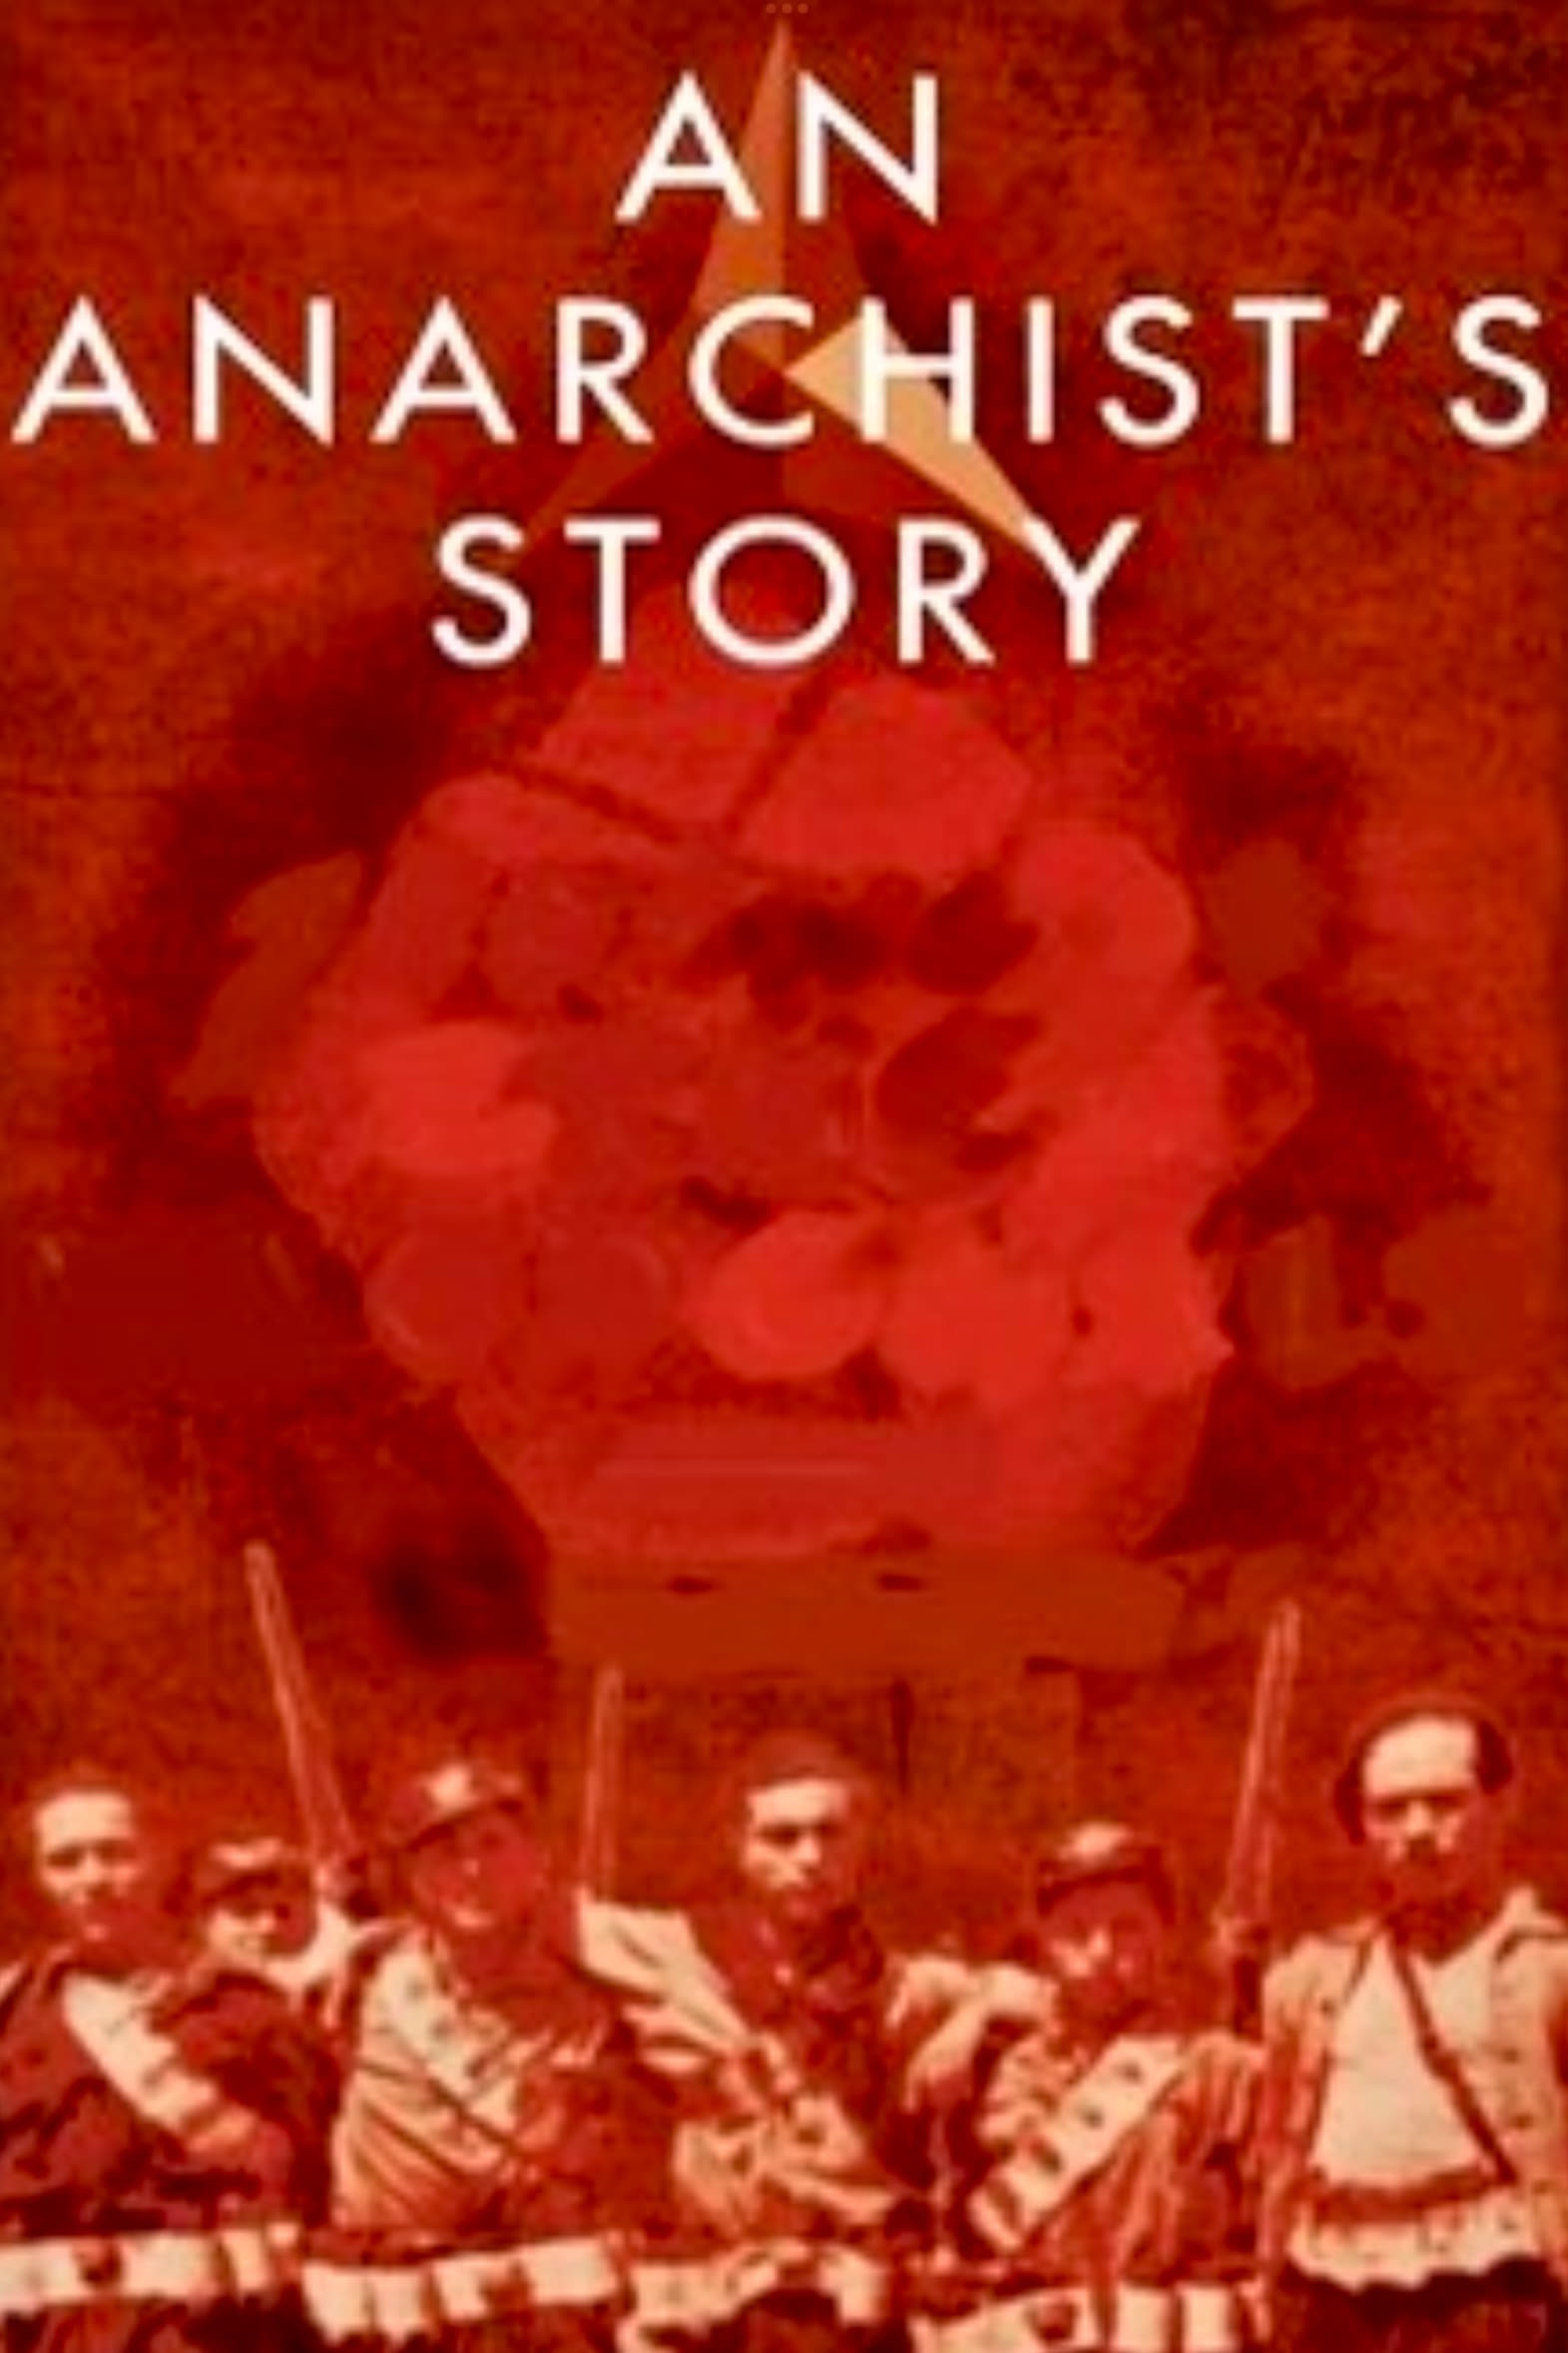 An Anarchist's Story